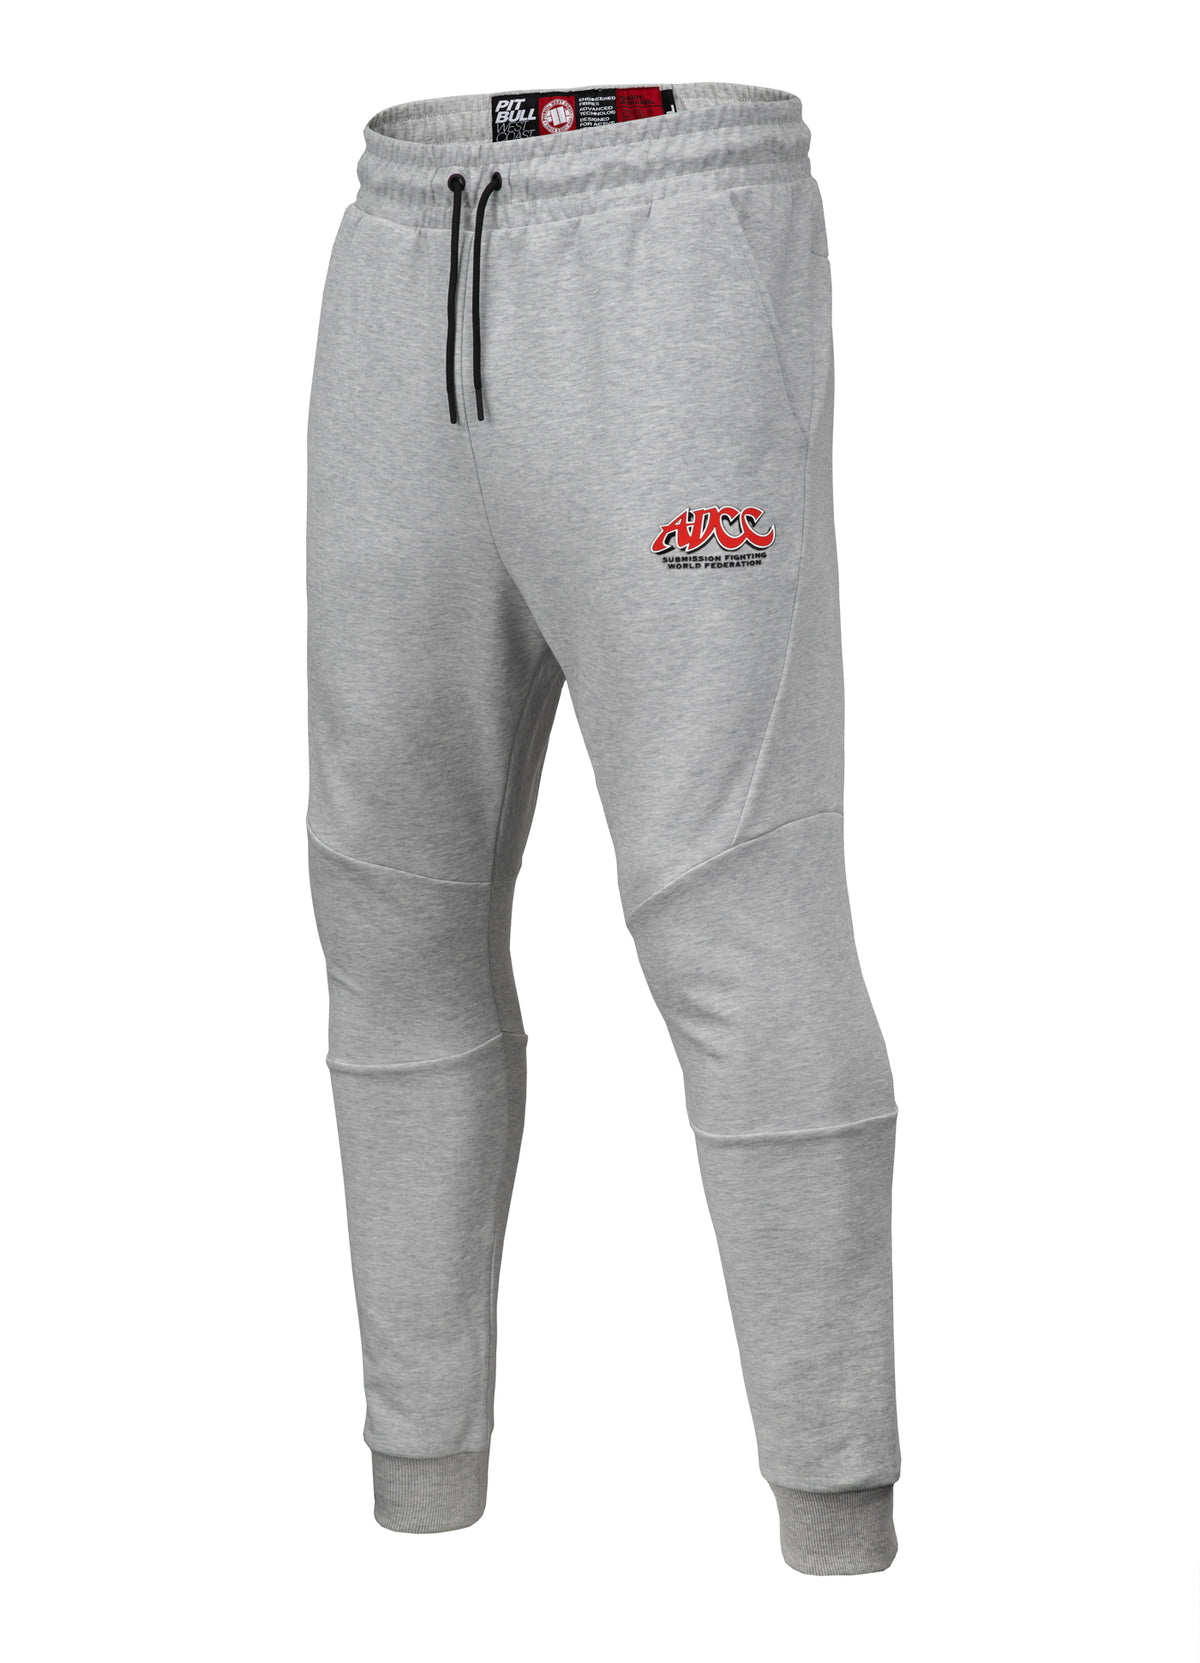 ADCC Grey Joggers